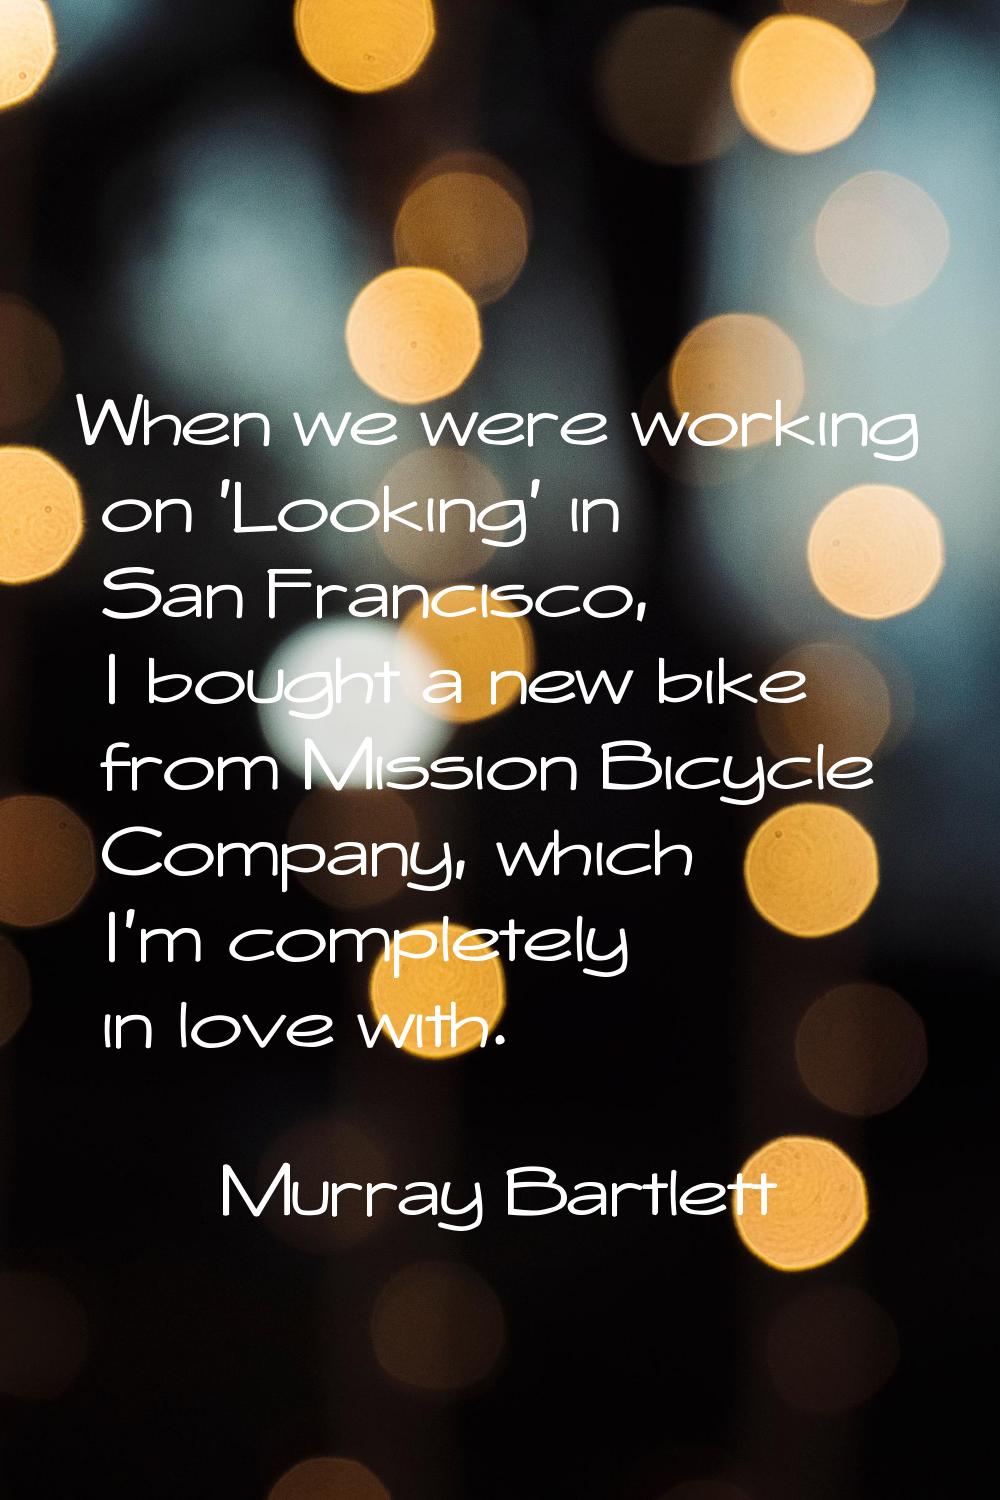 When we were working on 'Looking' in San Francisco, I bought a new bike from Mission Bicycle Compan